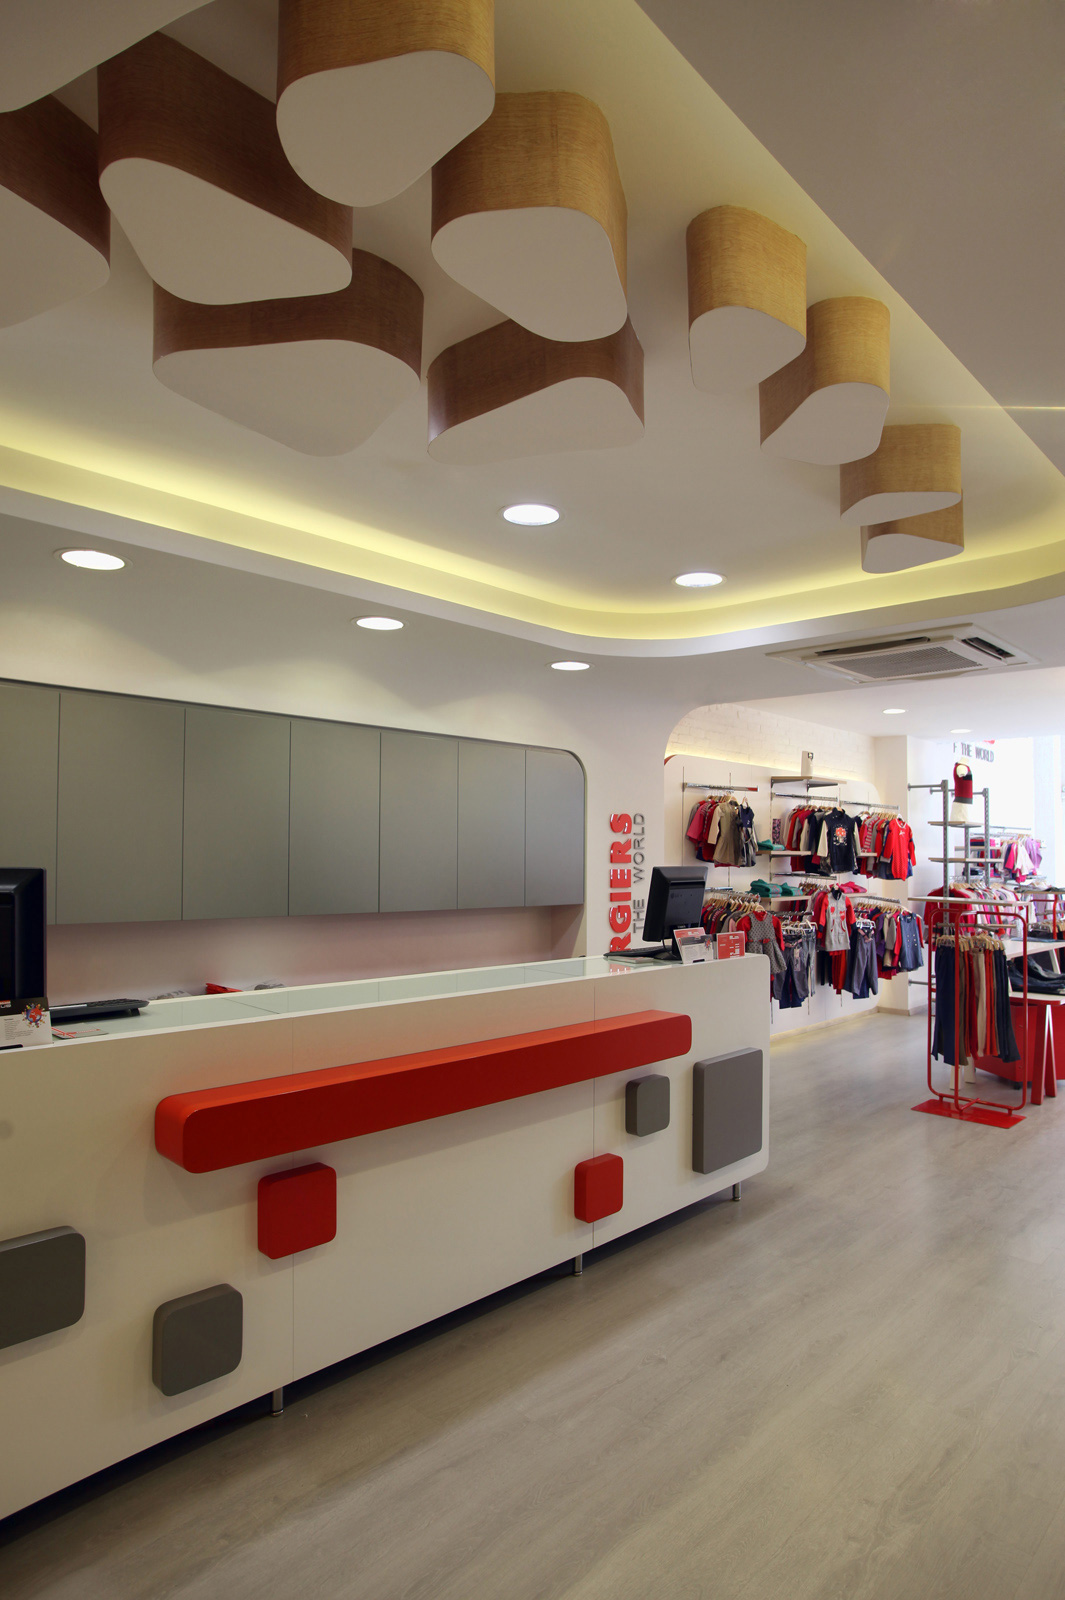 ENERGIERS CONCEPT STORE, T Square Architects - Αρχιτεκτονικό Γραφείο